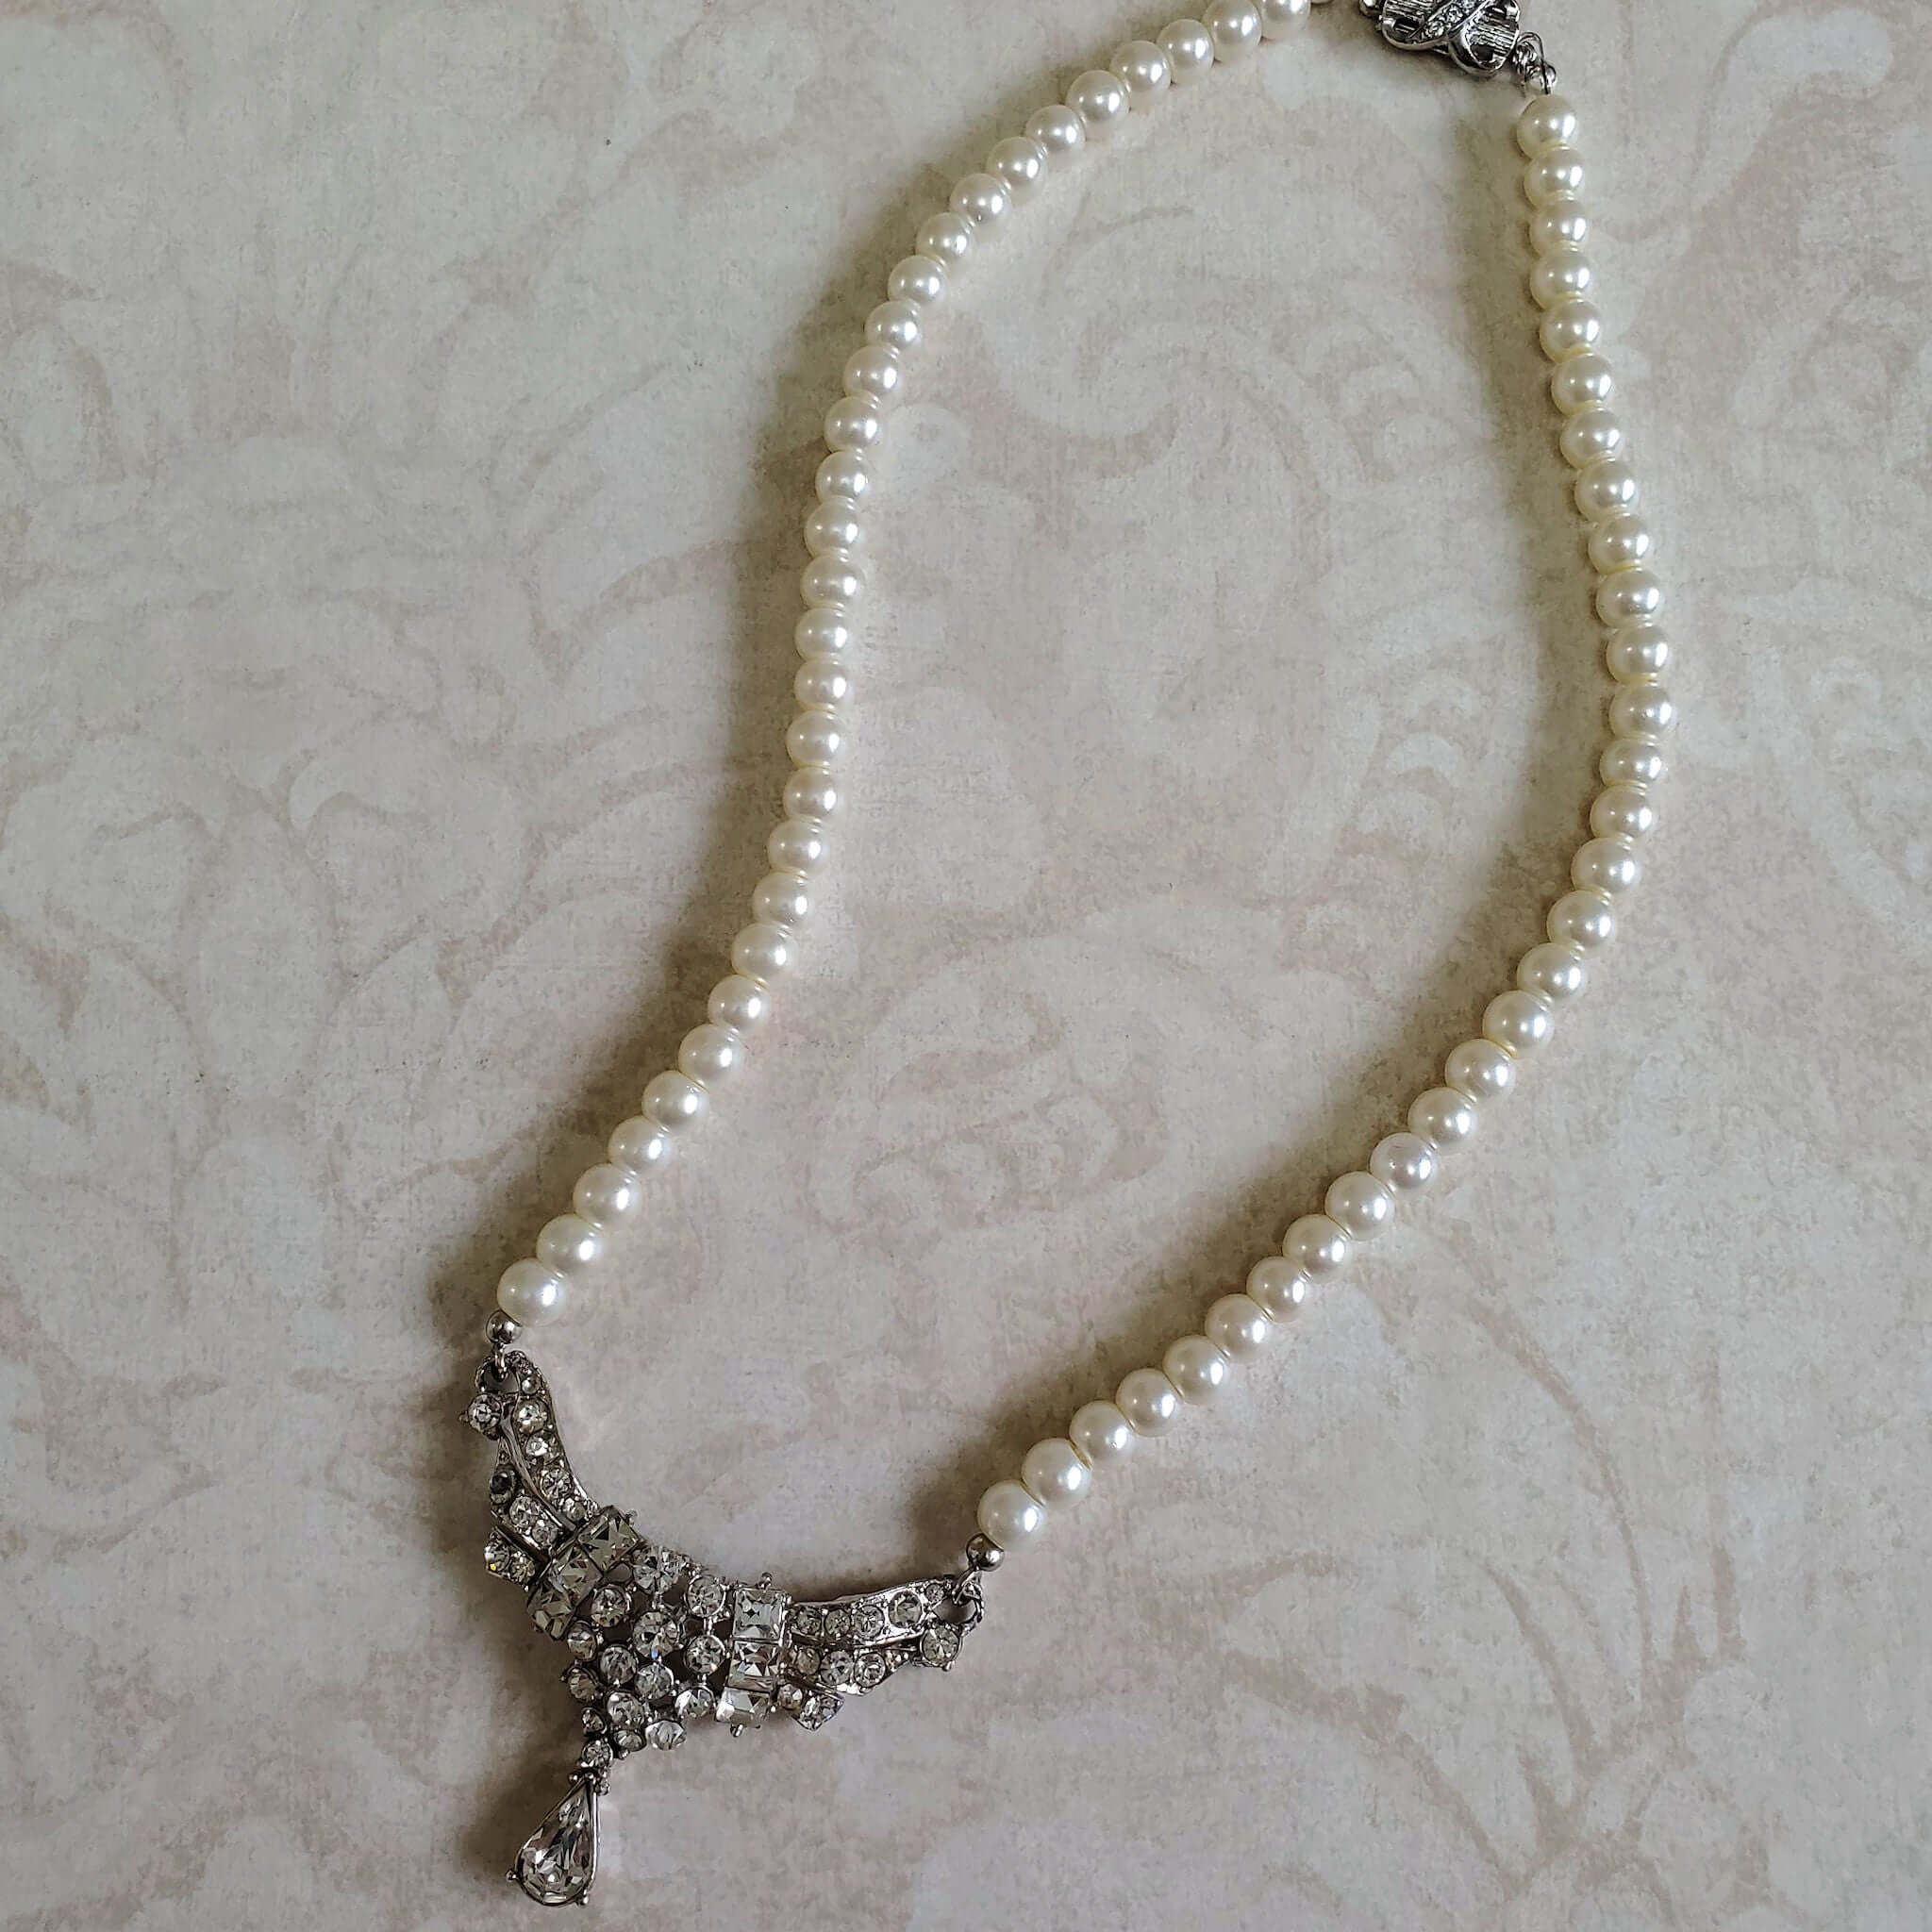 Vintage Double Strand Pearl Necklace Rhinestone Clasp Bridal